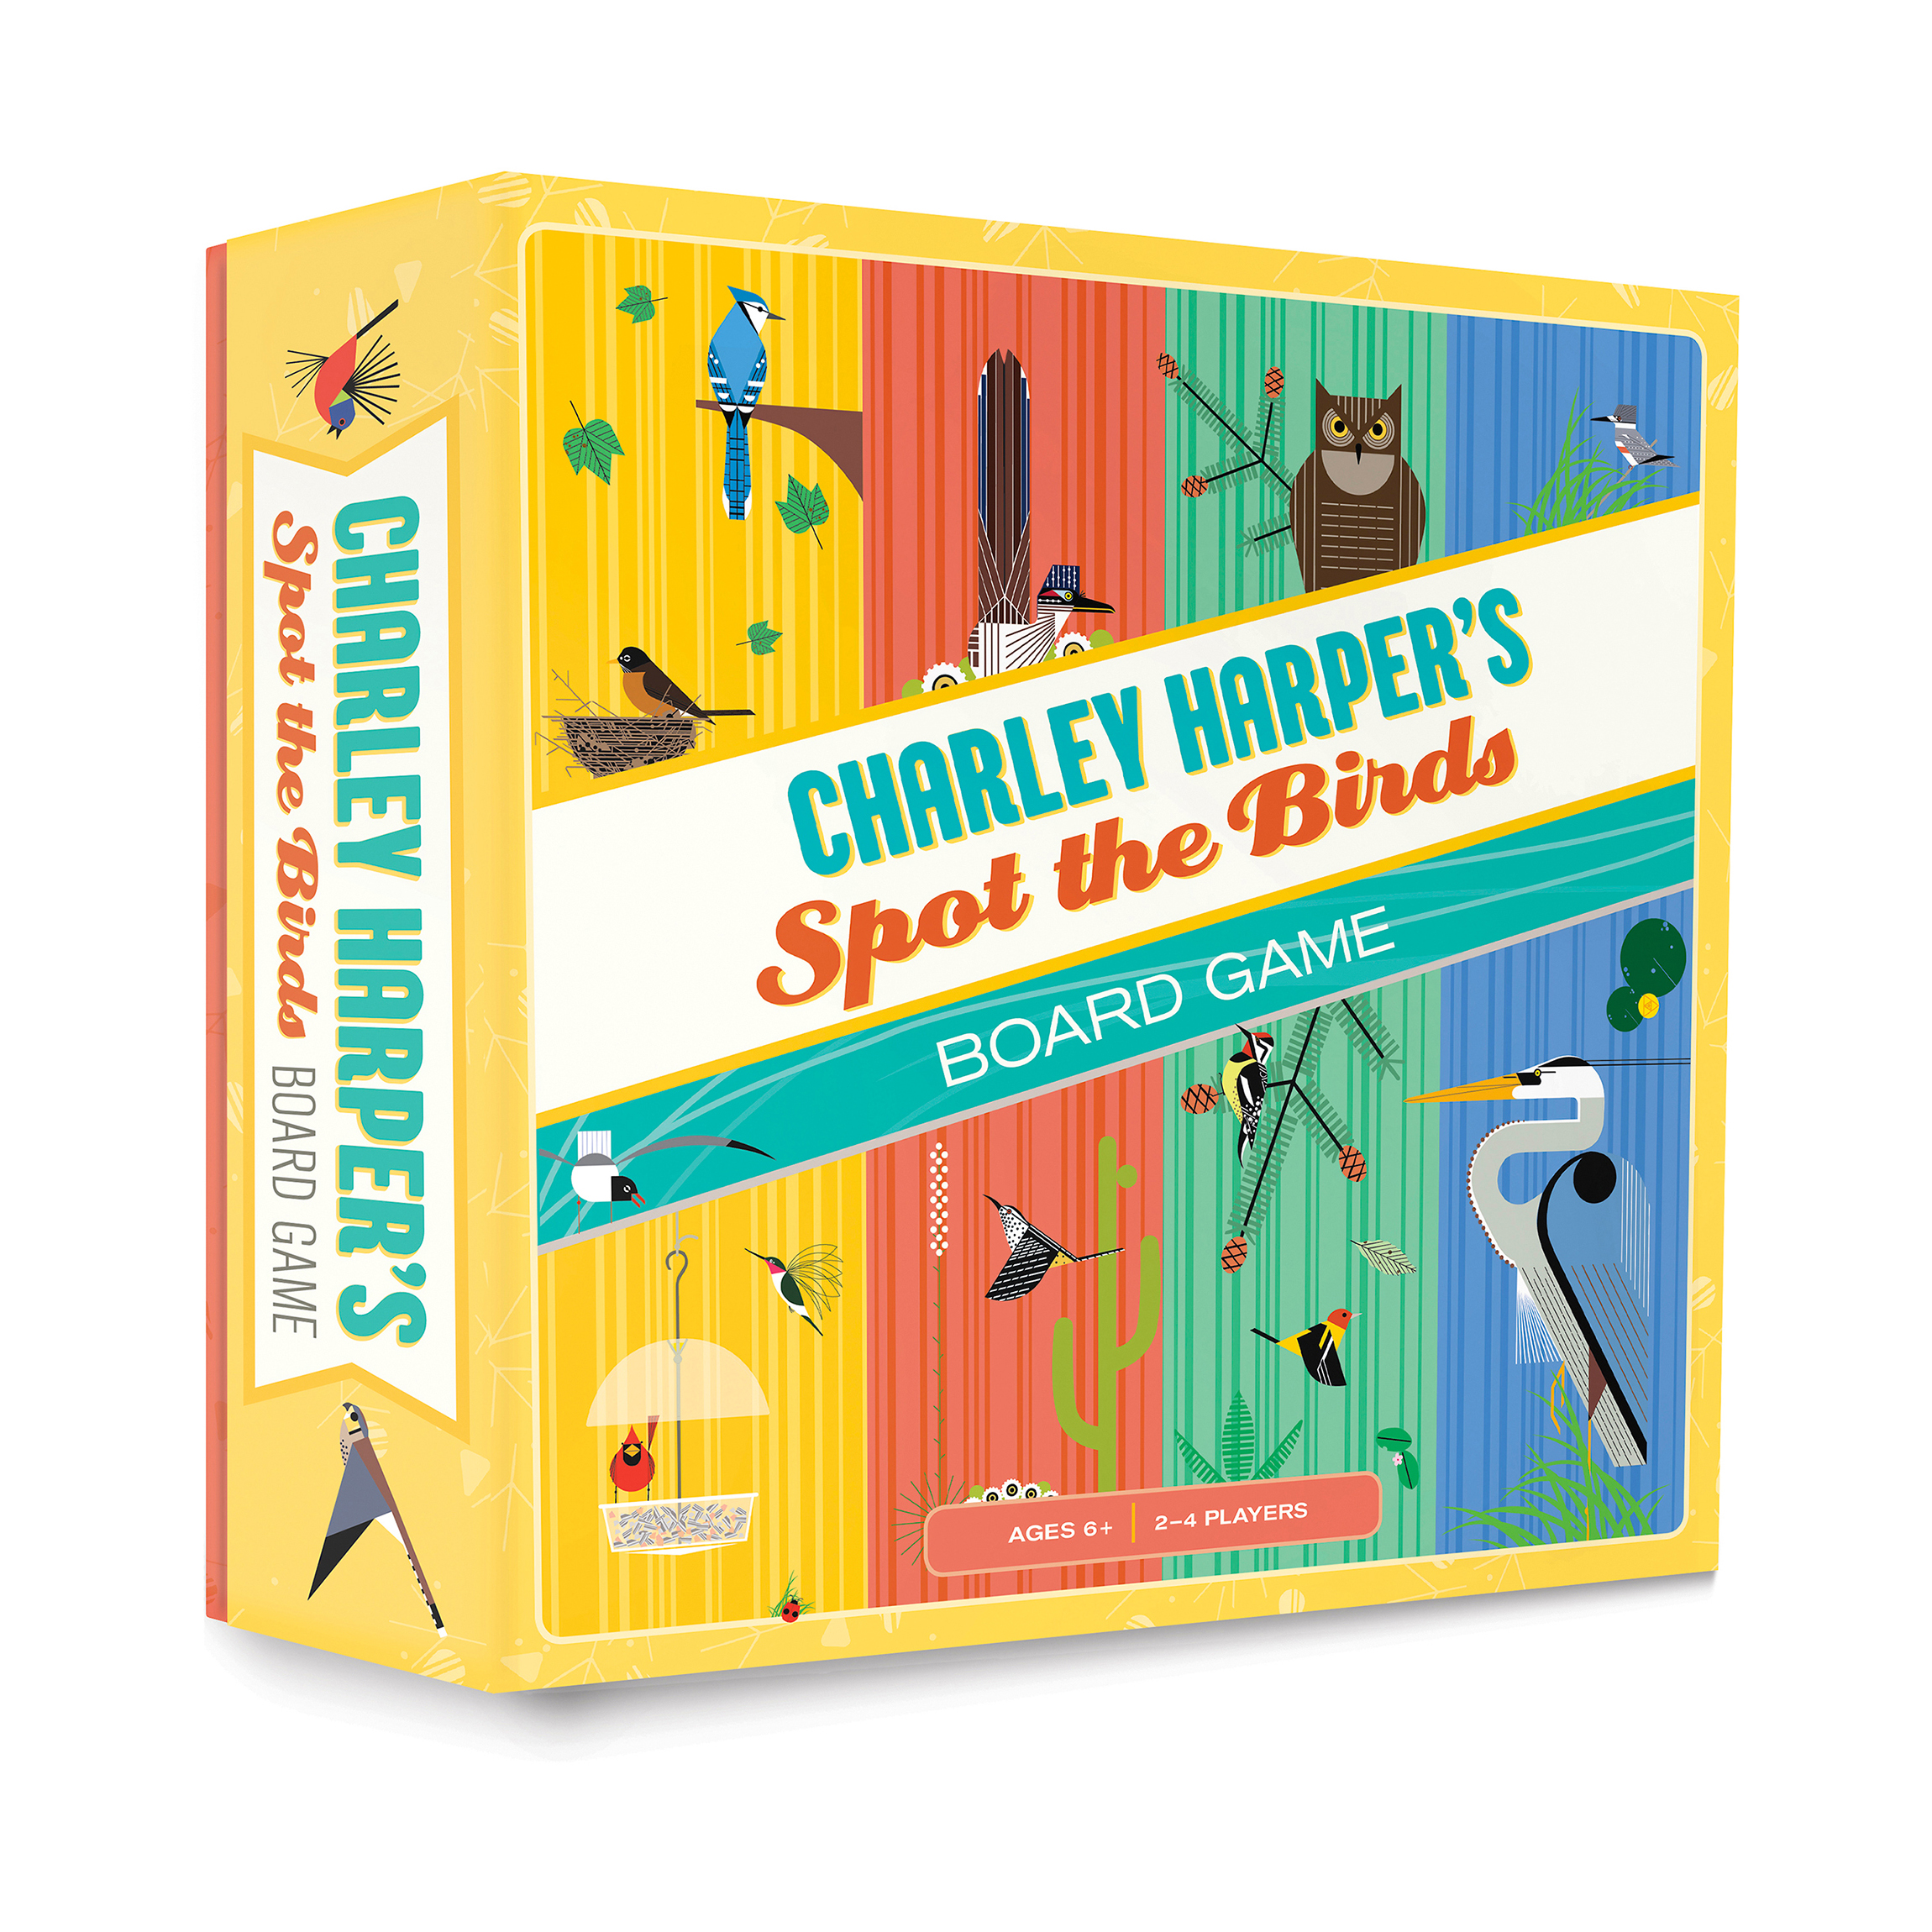 Pomegranate Communications, Inc. Charley Harper's Spot the Birds Board Game